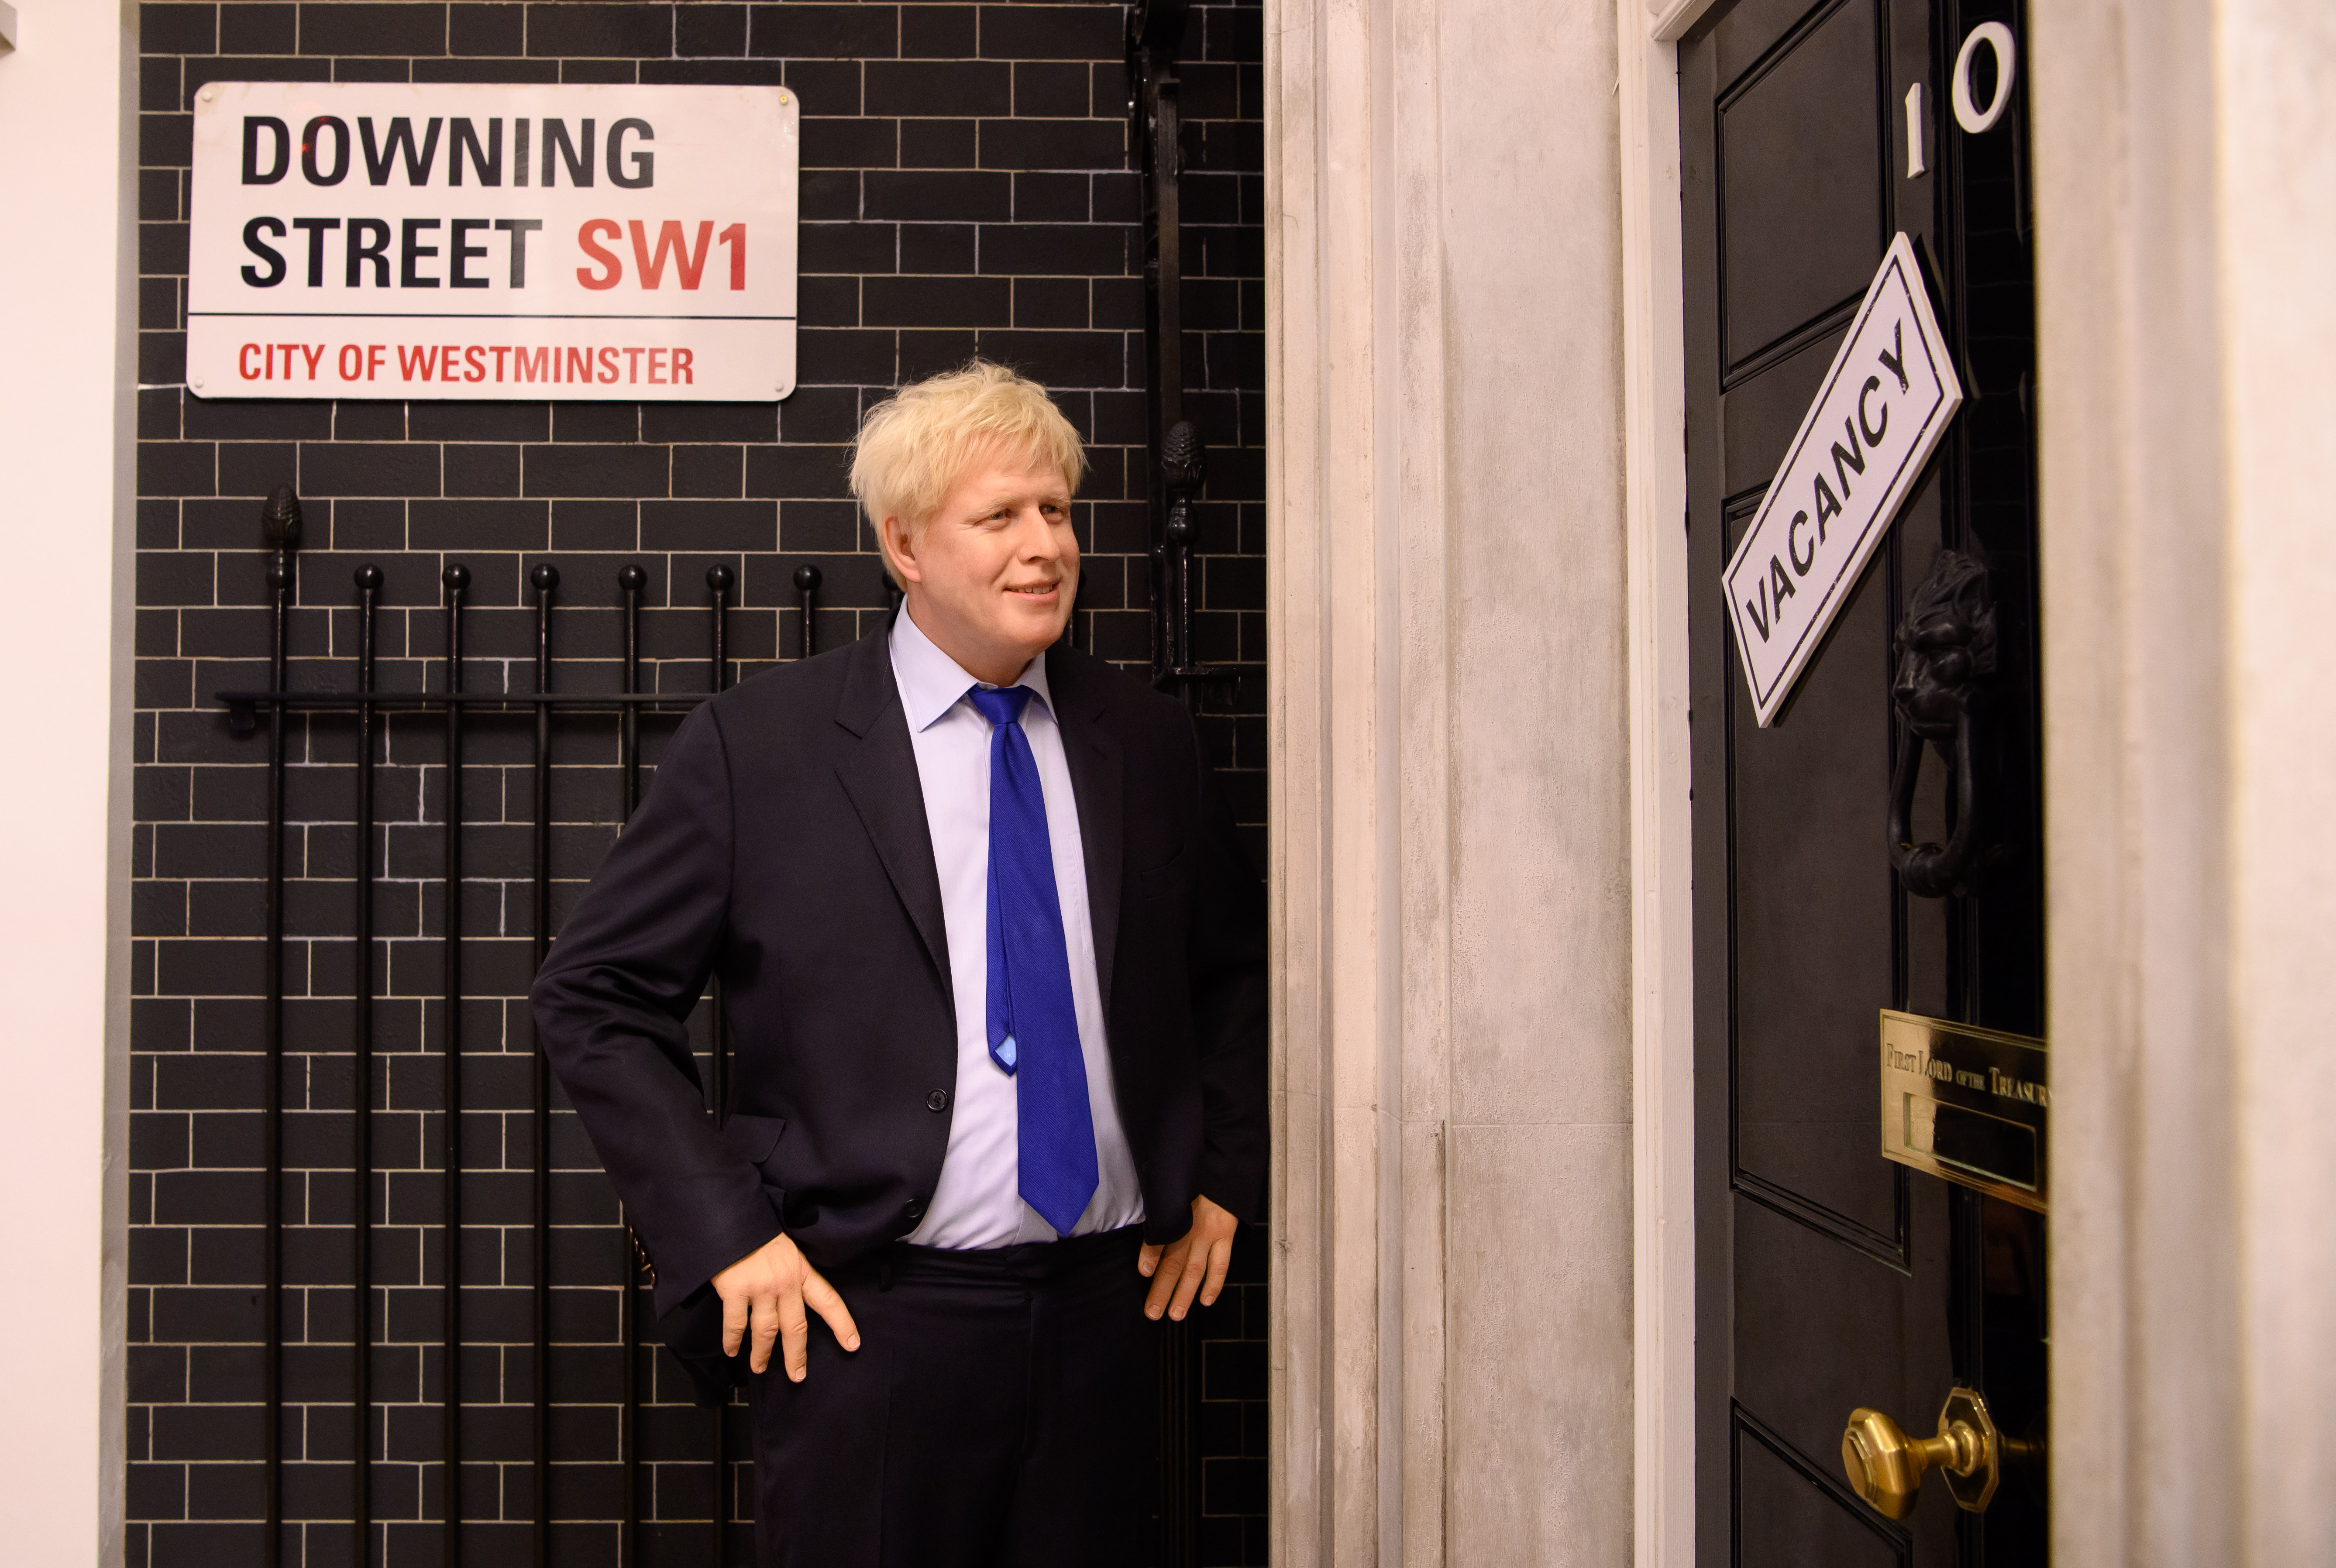 Madame Tussauds in London updated their number 10 Downing Street display with a sign saying "vacancy".